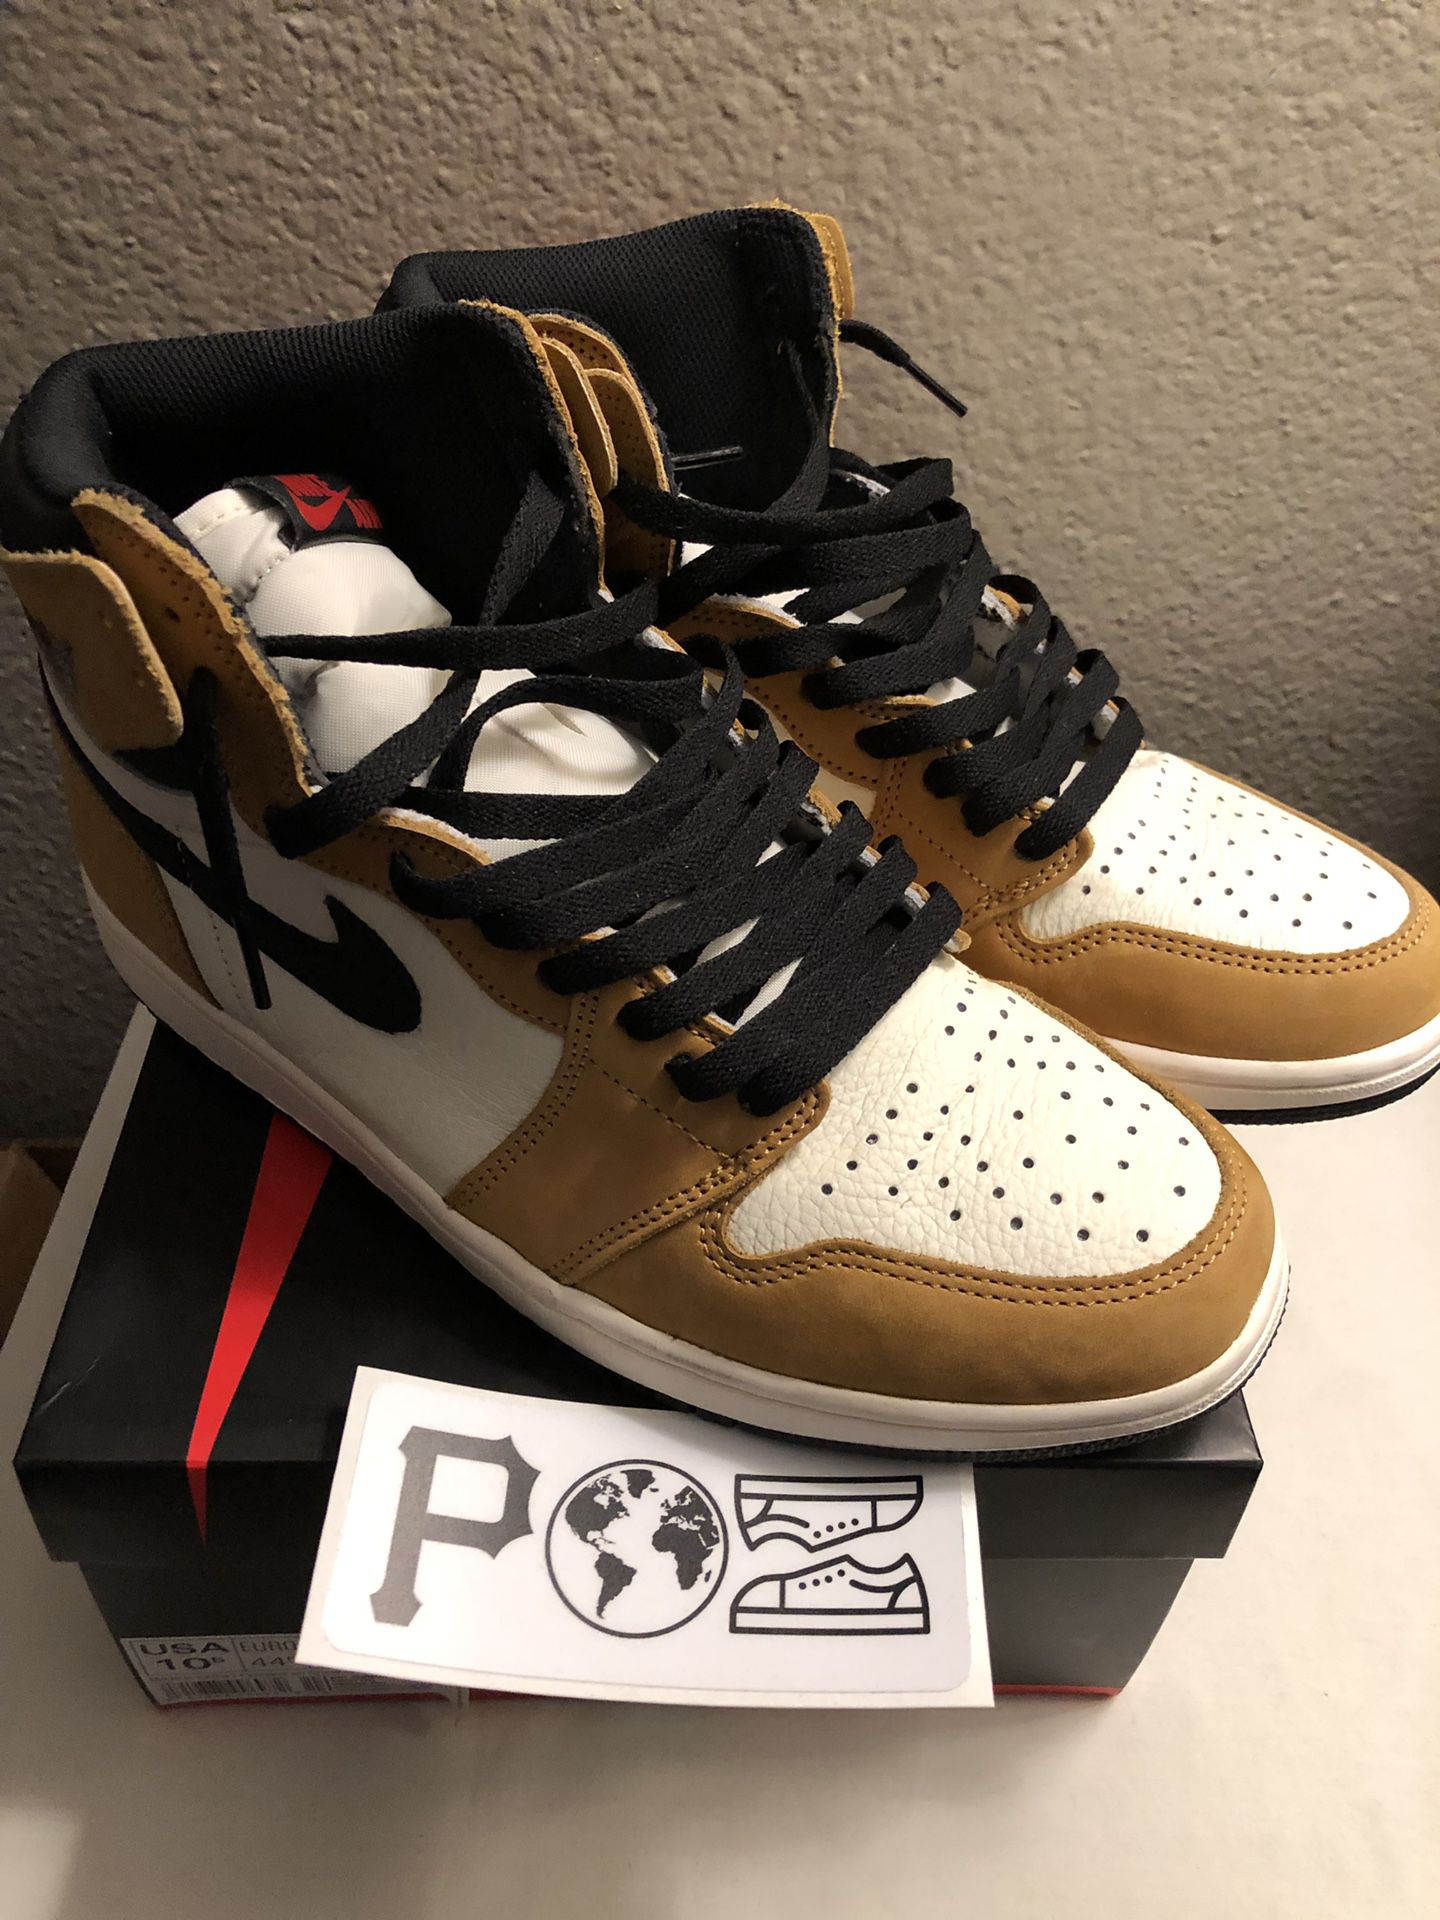 Air Jordan Retro 1 “Rookie of the year” size 10.5